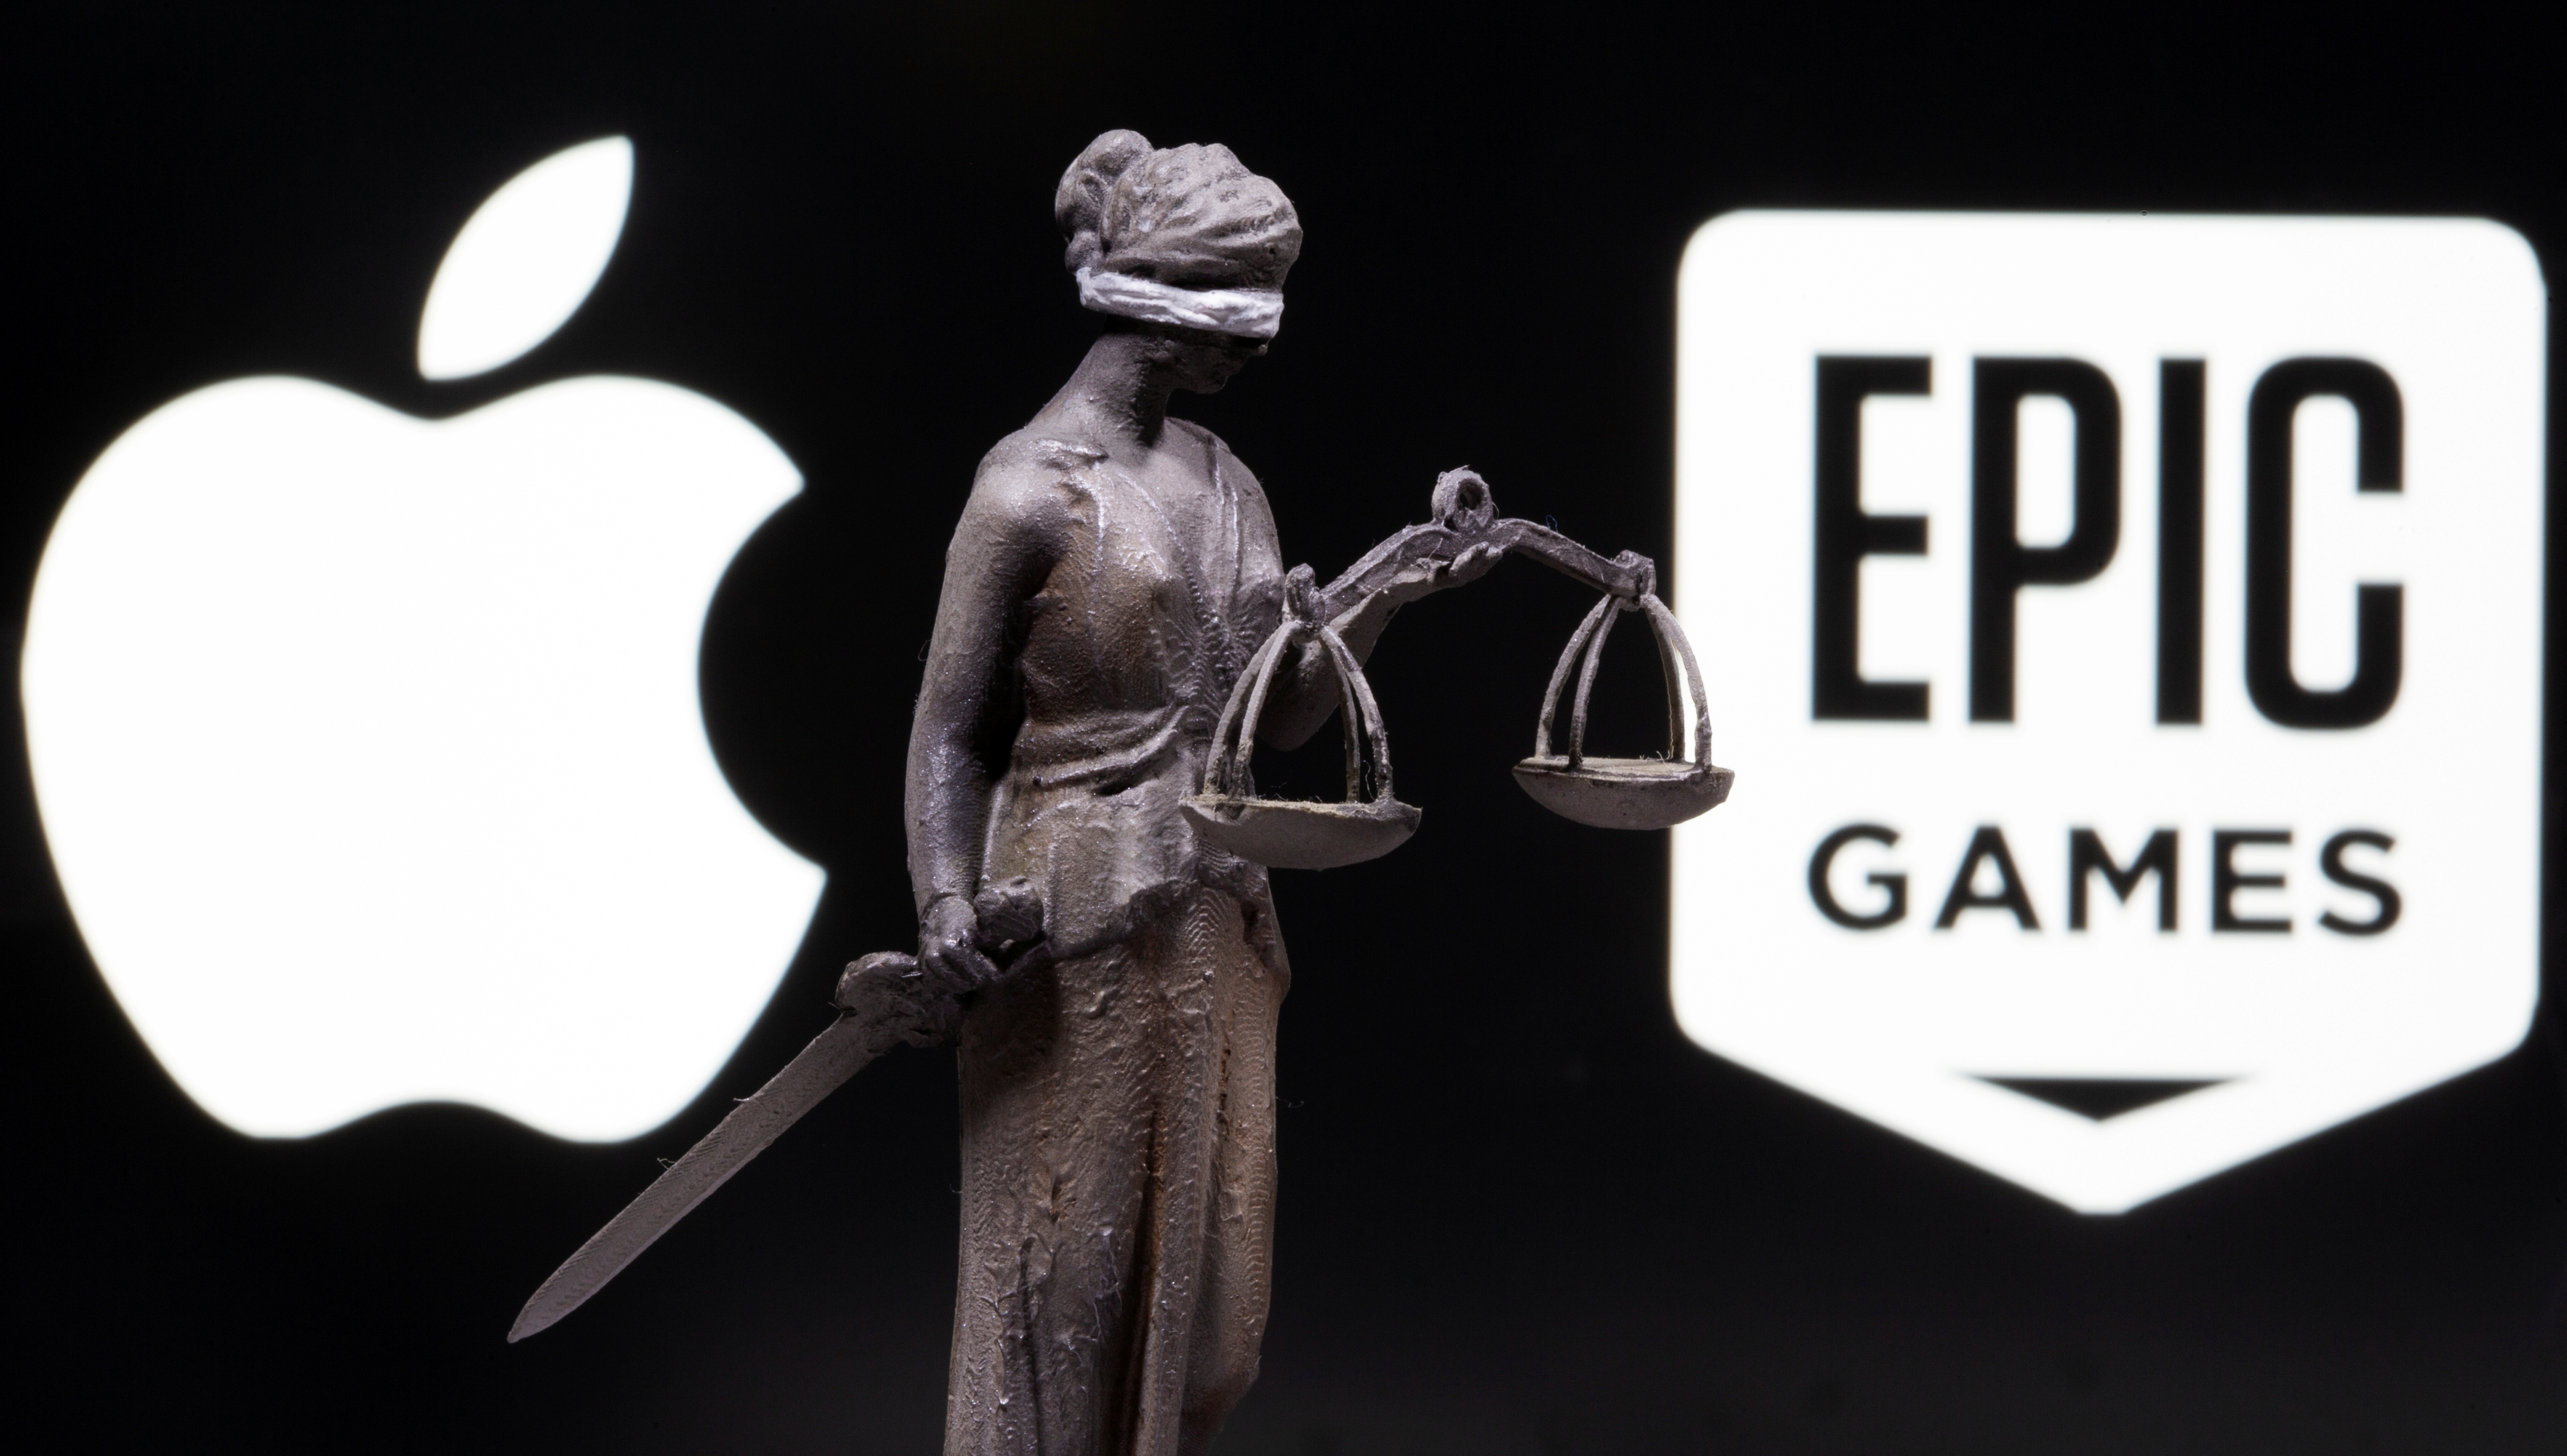 3D printed Lady Justice figure is seen in front of displayed Apple and Epic Games logos in this illustration photo